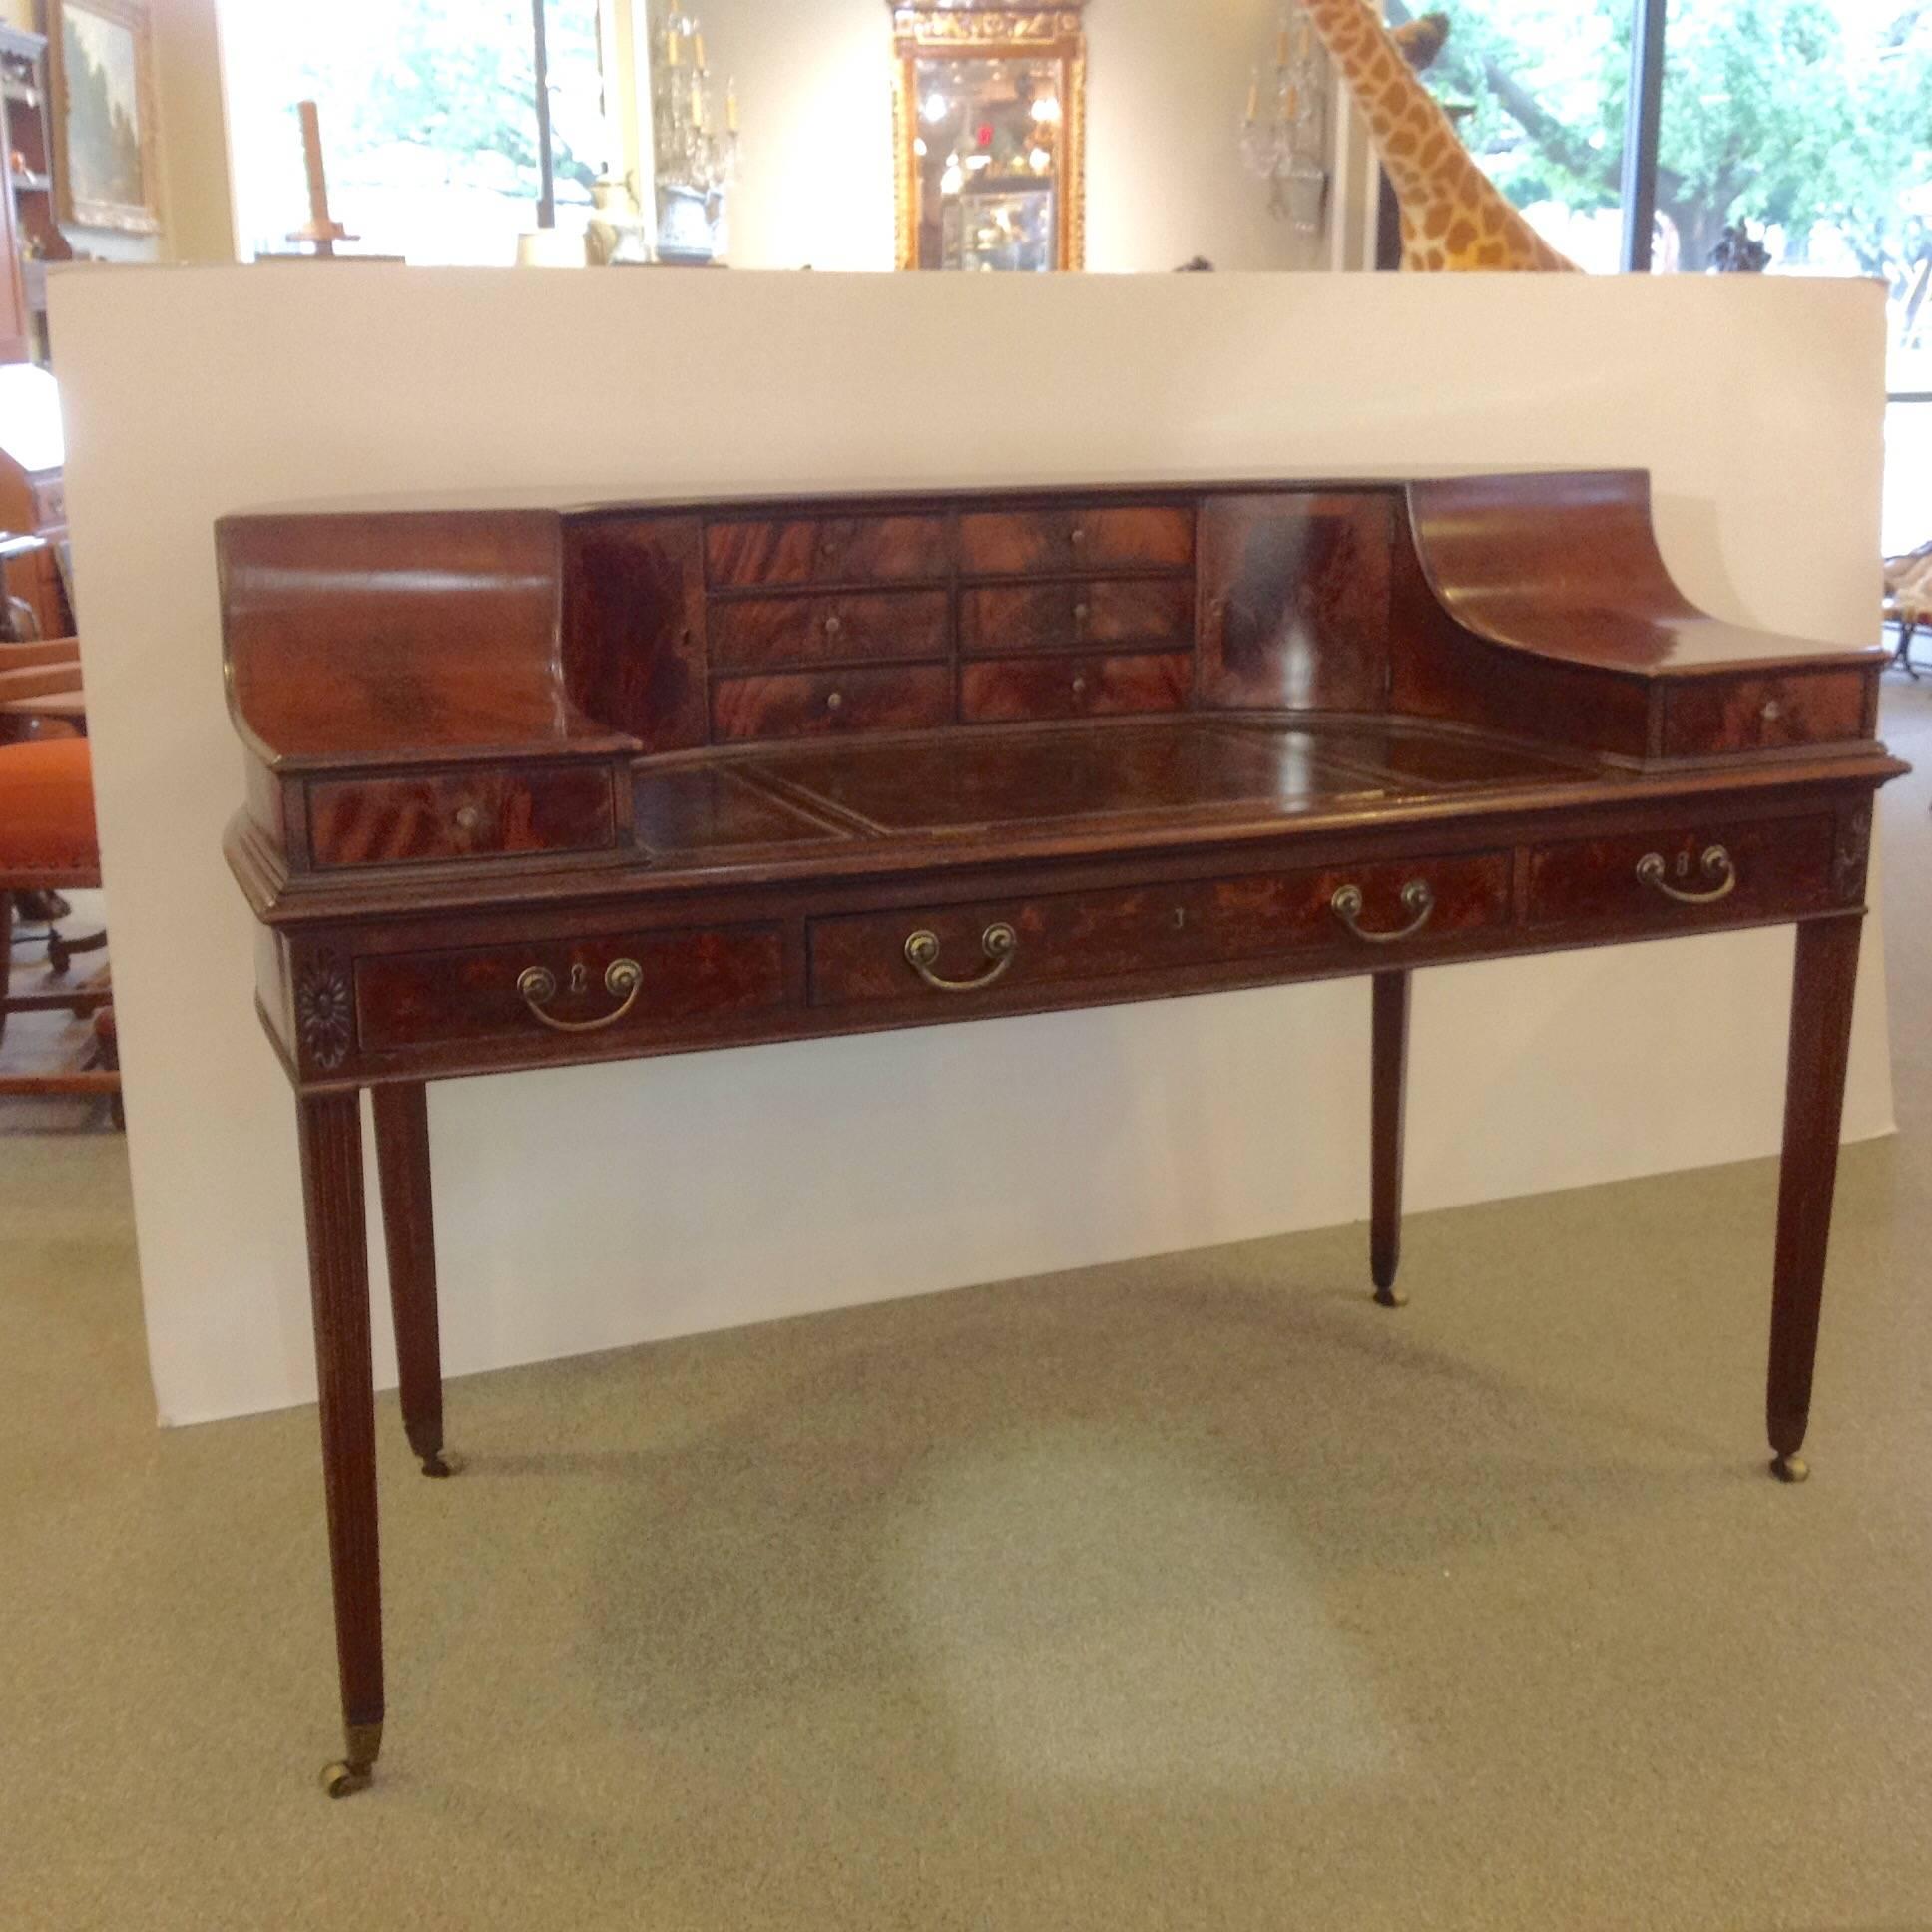 Free standing English Carlton House mahogany desk with fully finished back. It measures 60" wide. The interior work surface is 37" wide and almost 21" deep, circa early 1800s.